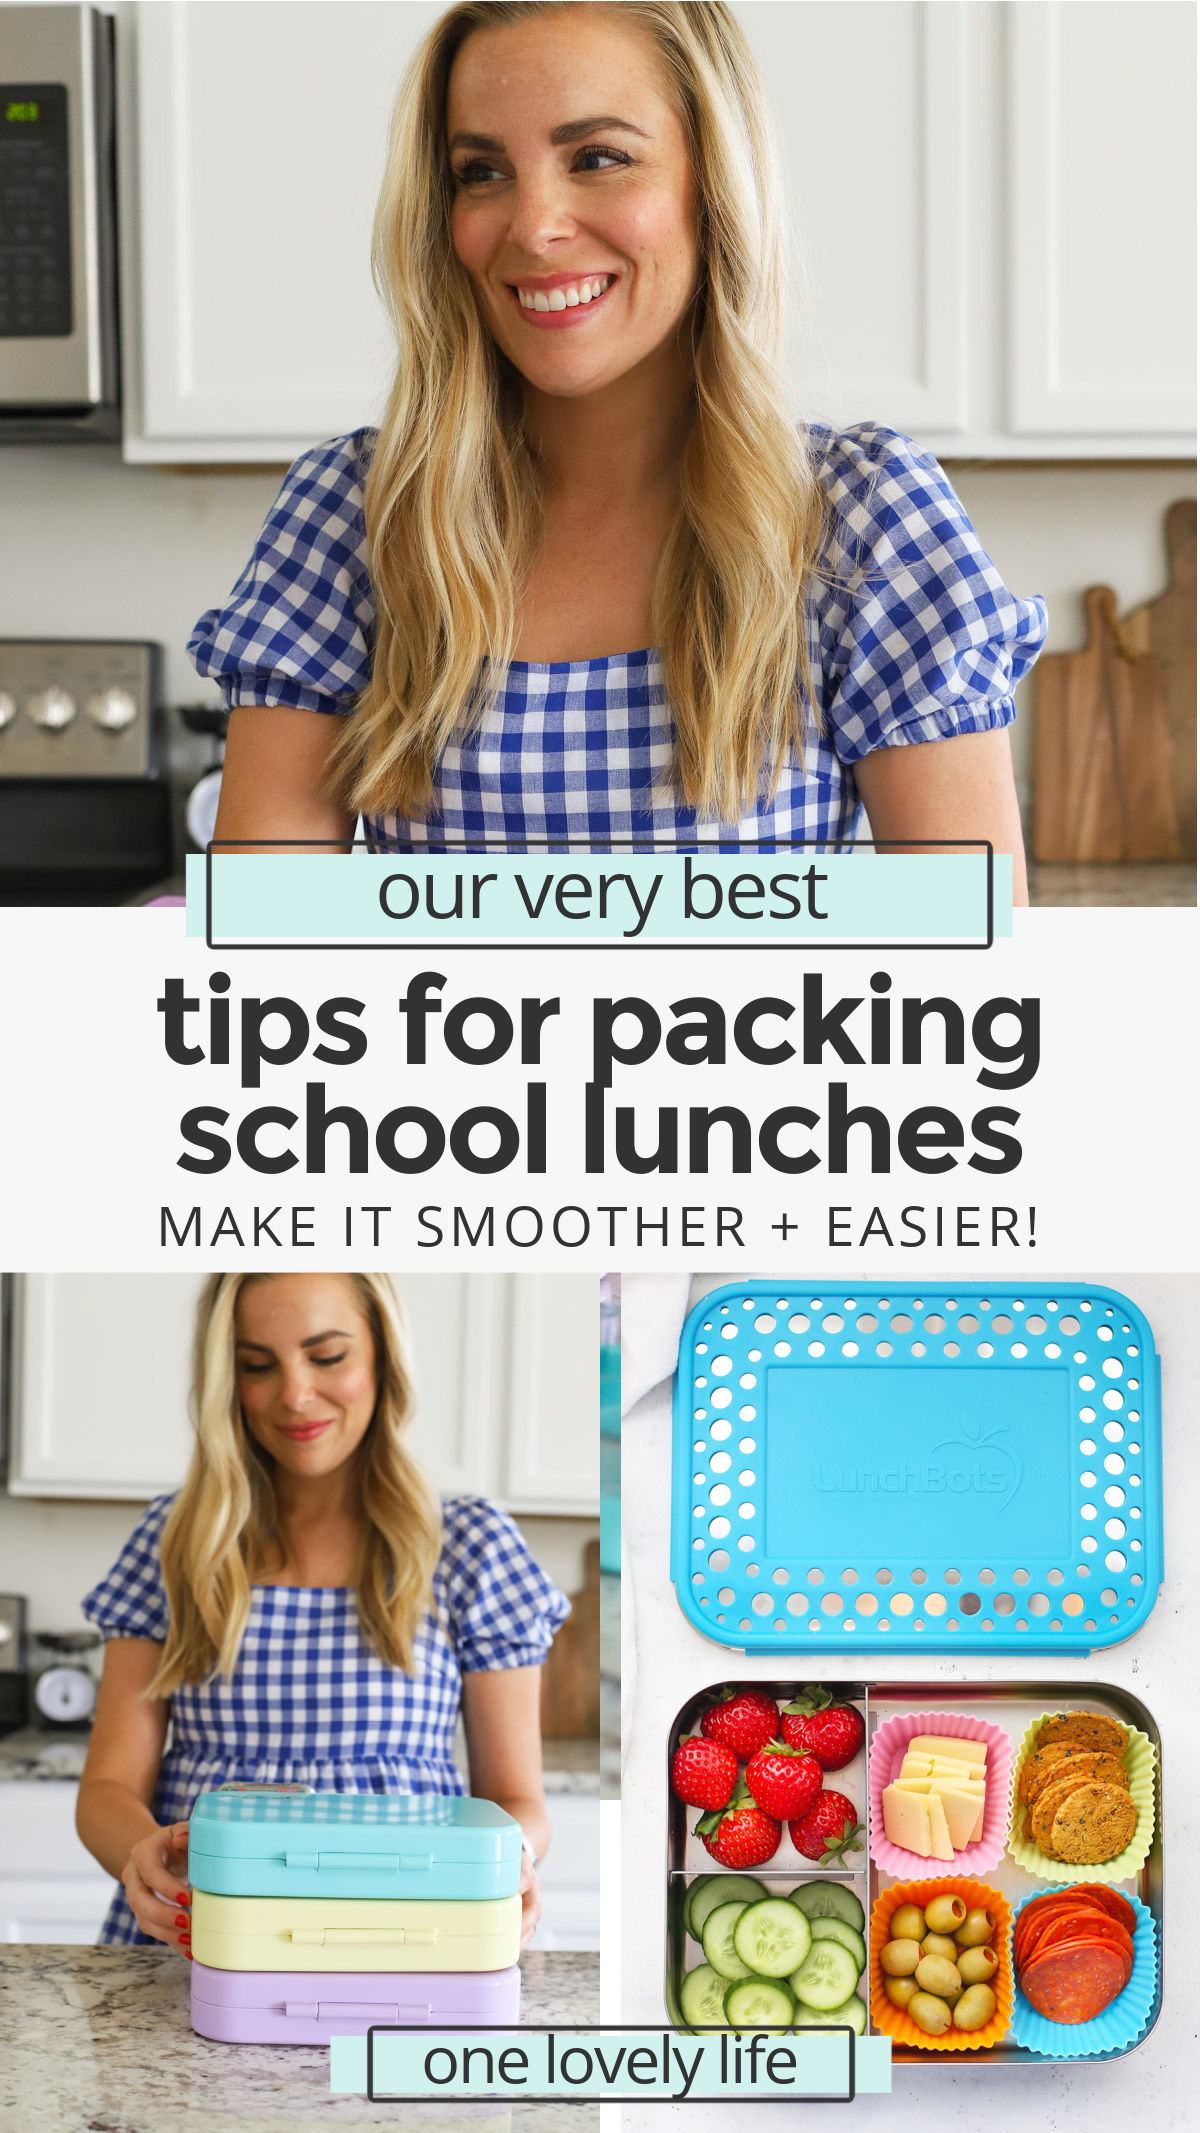 5 Hacks to Simplify Packing School Lunch! All our best school lunch tips and tricks for making school lunches fast and easy! // school lunches // school lunch ideas // mom hacks // time saving hacks // healthy lunches #packedlunch #schoollunch #momtip #backtoschool #lunch